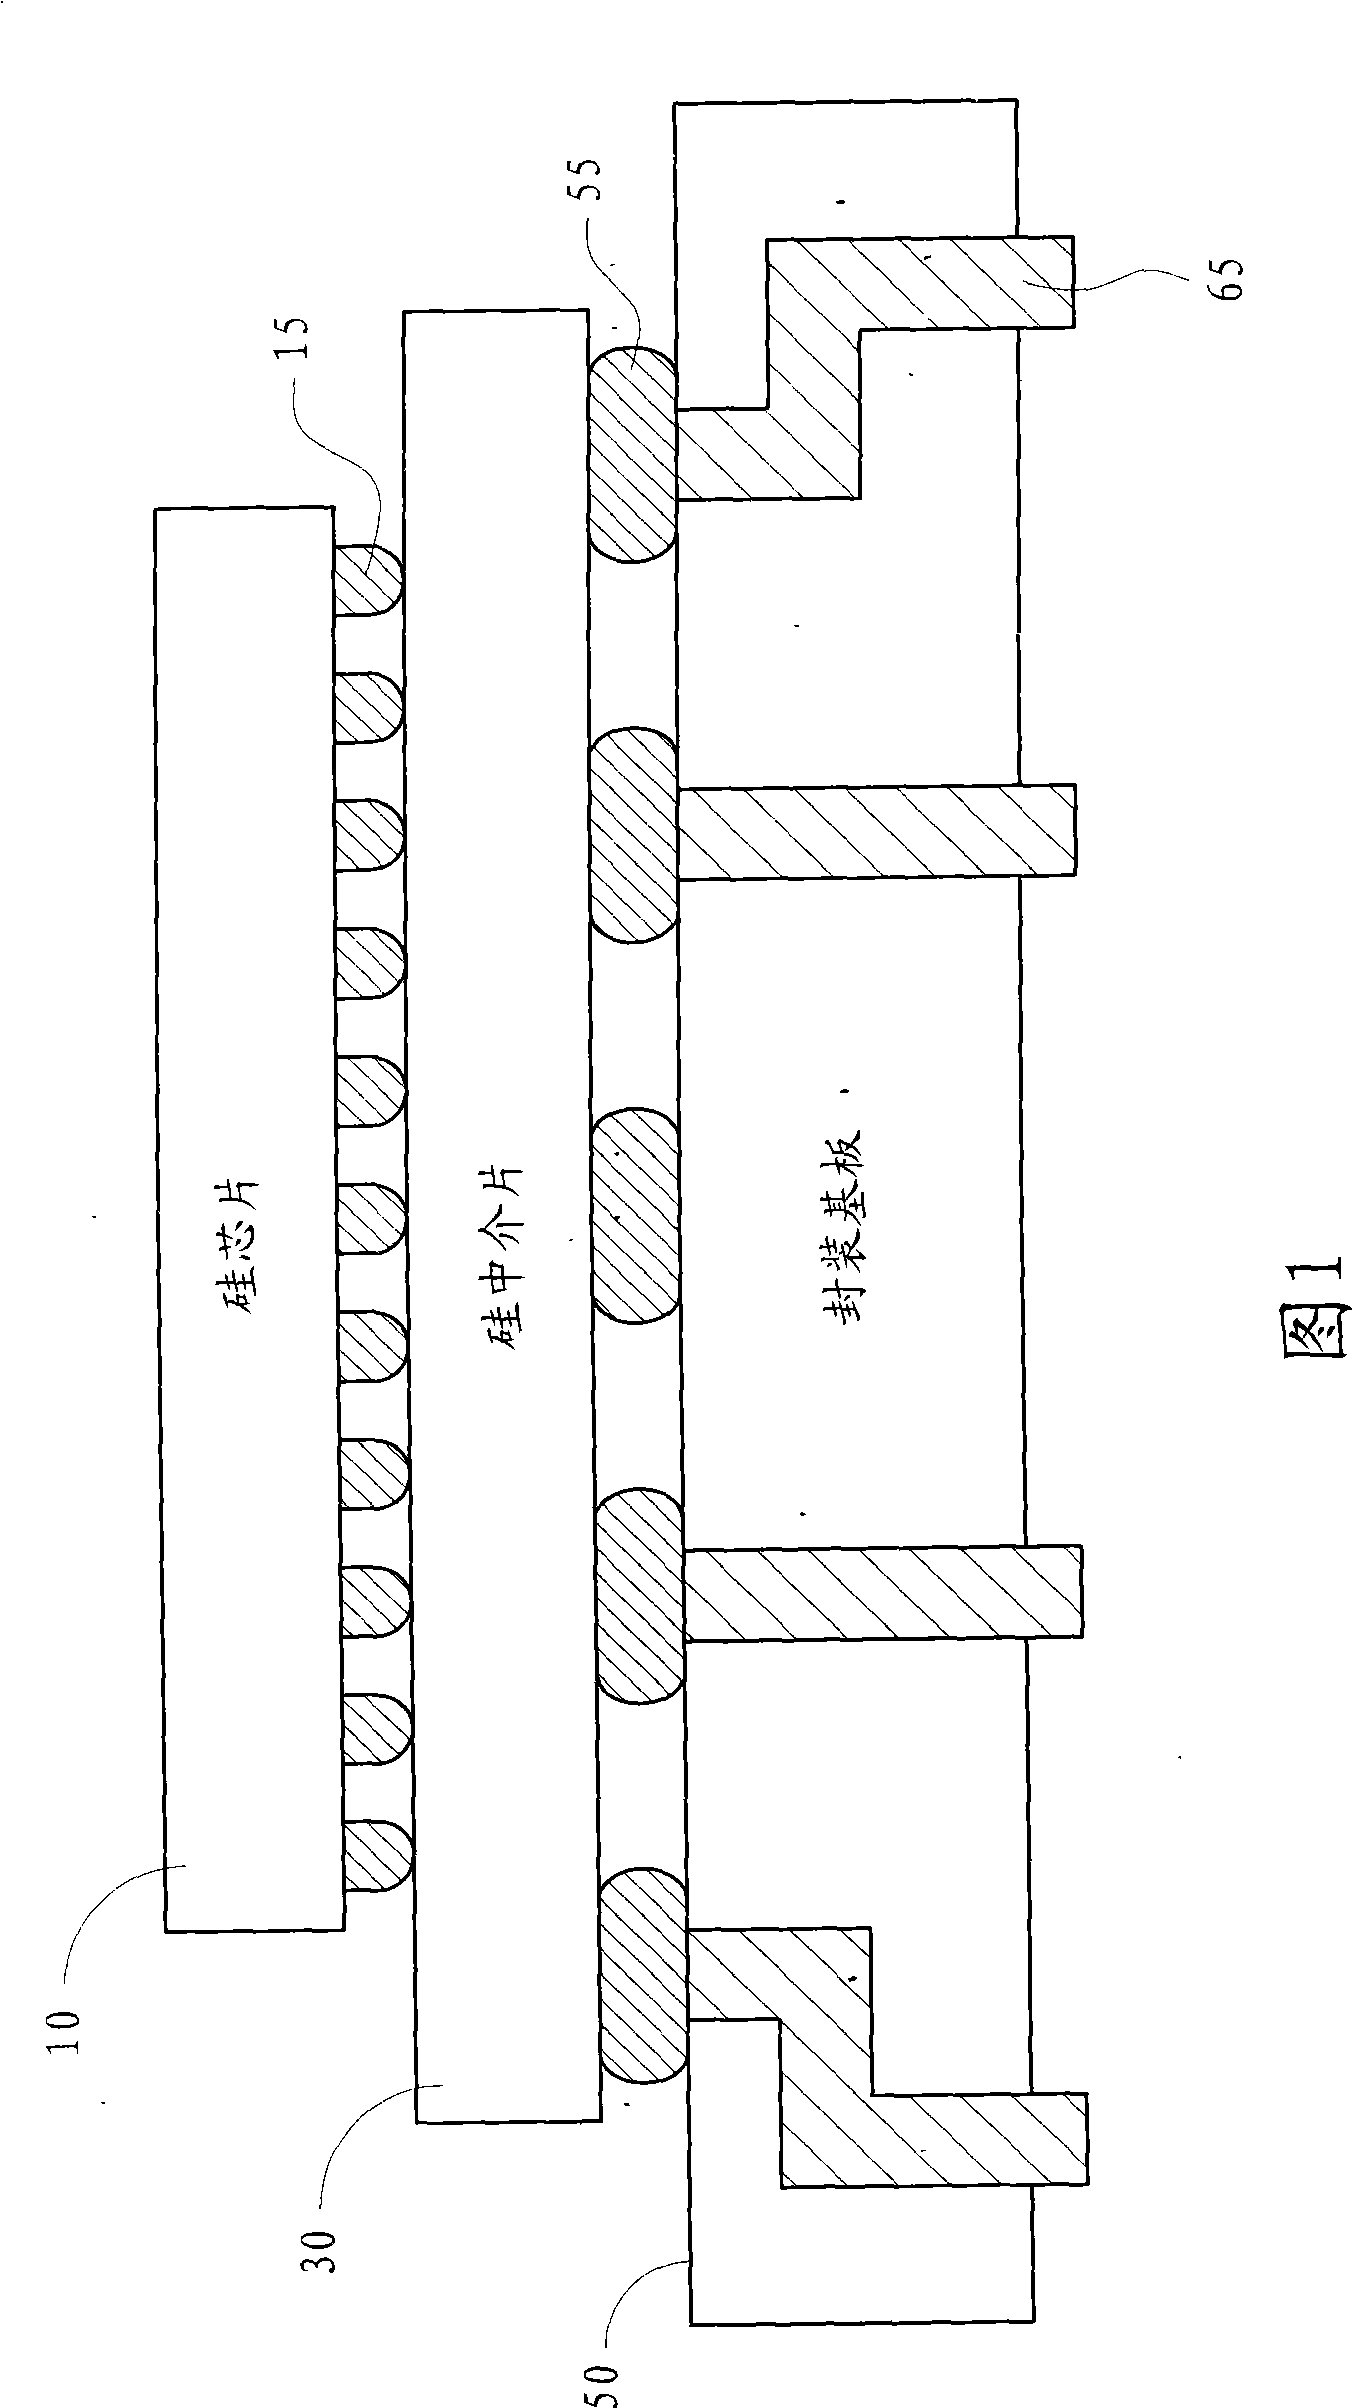 Semiconductor interposer and its application in electronic package